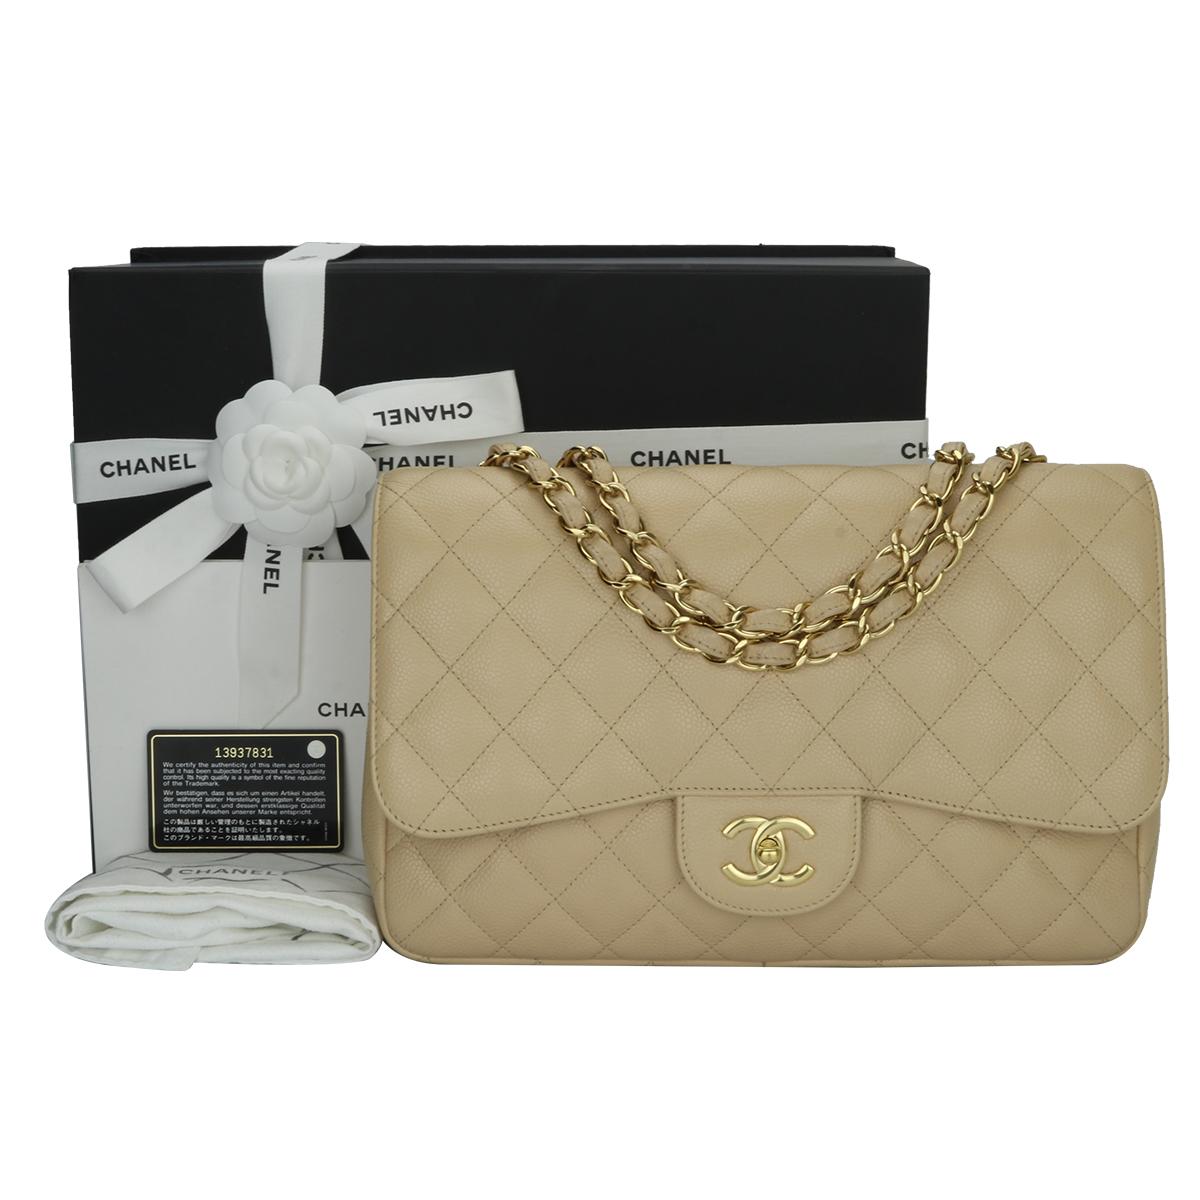 Authentic CHANEL Classic Single Flap Jumbo Bag Beige Clair Caviar with Gold Hardware 2009.

This stunning bag is in excellent condition, the bag still holds the original shape and the hardware is still very shiny.

Exterior Condition: Mint